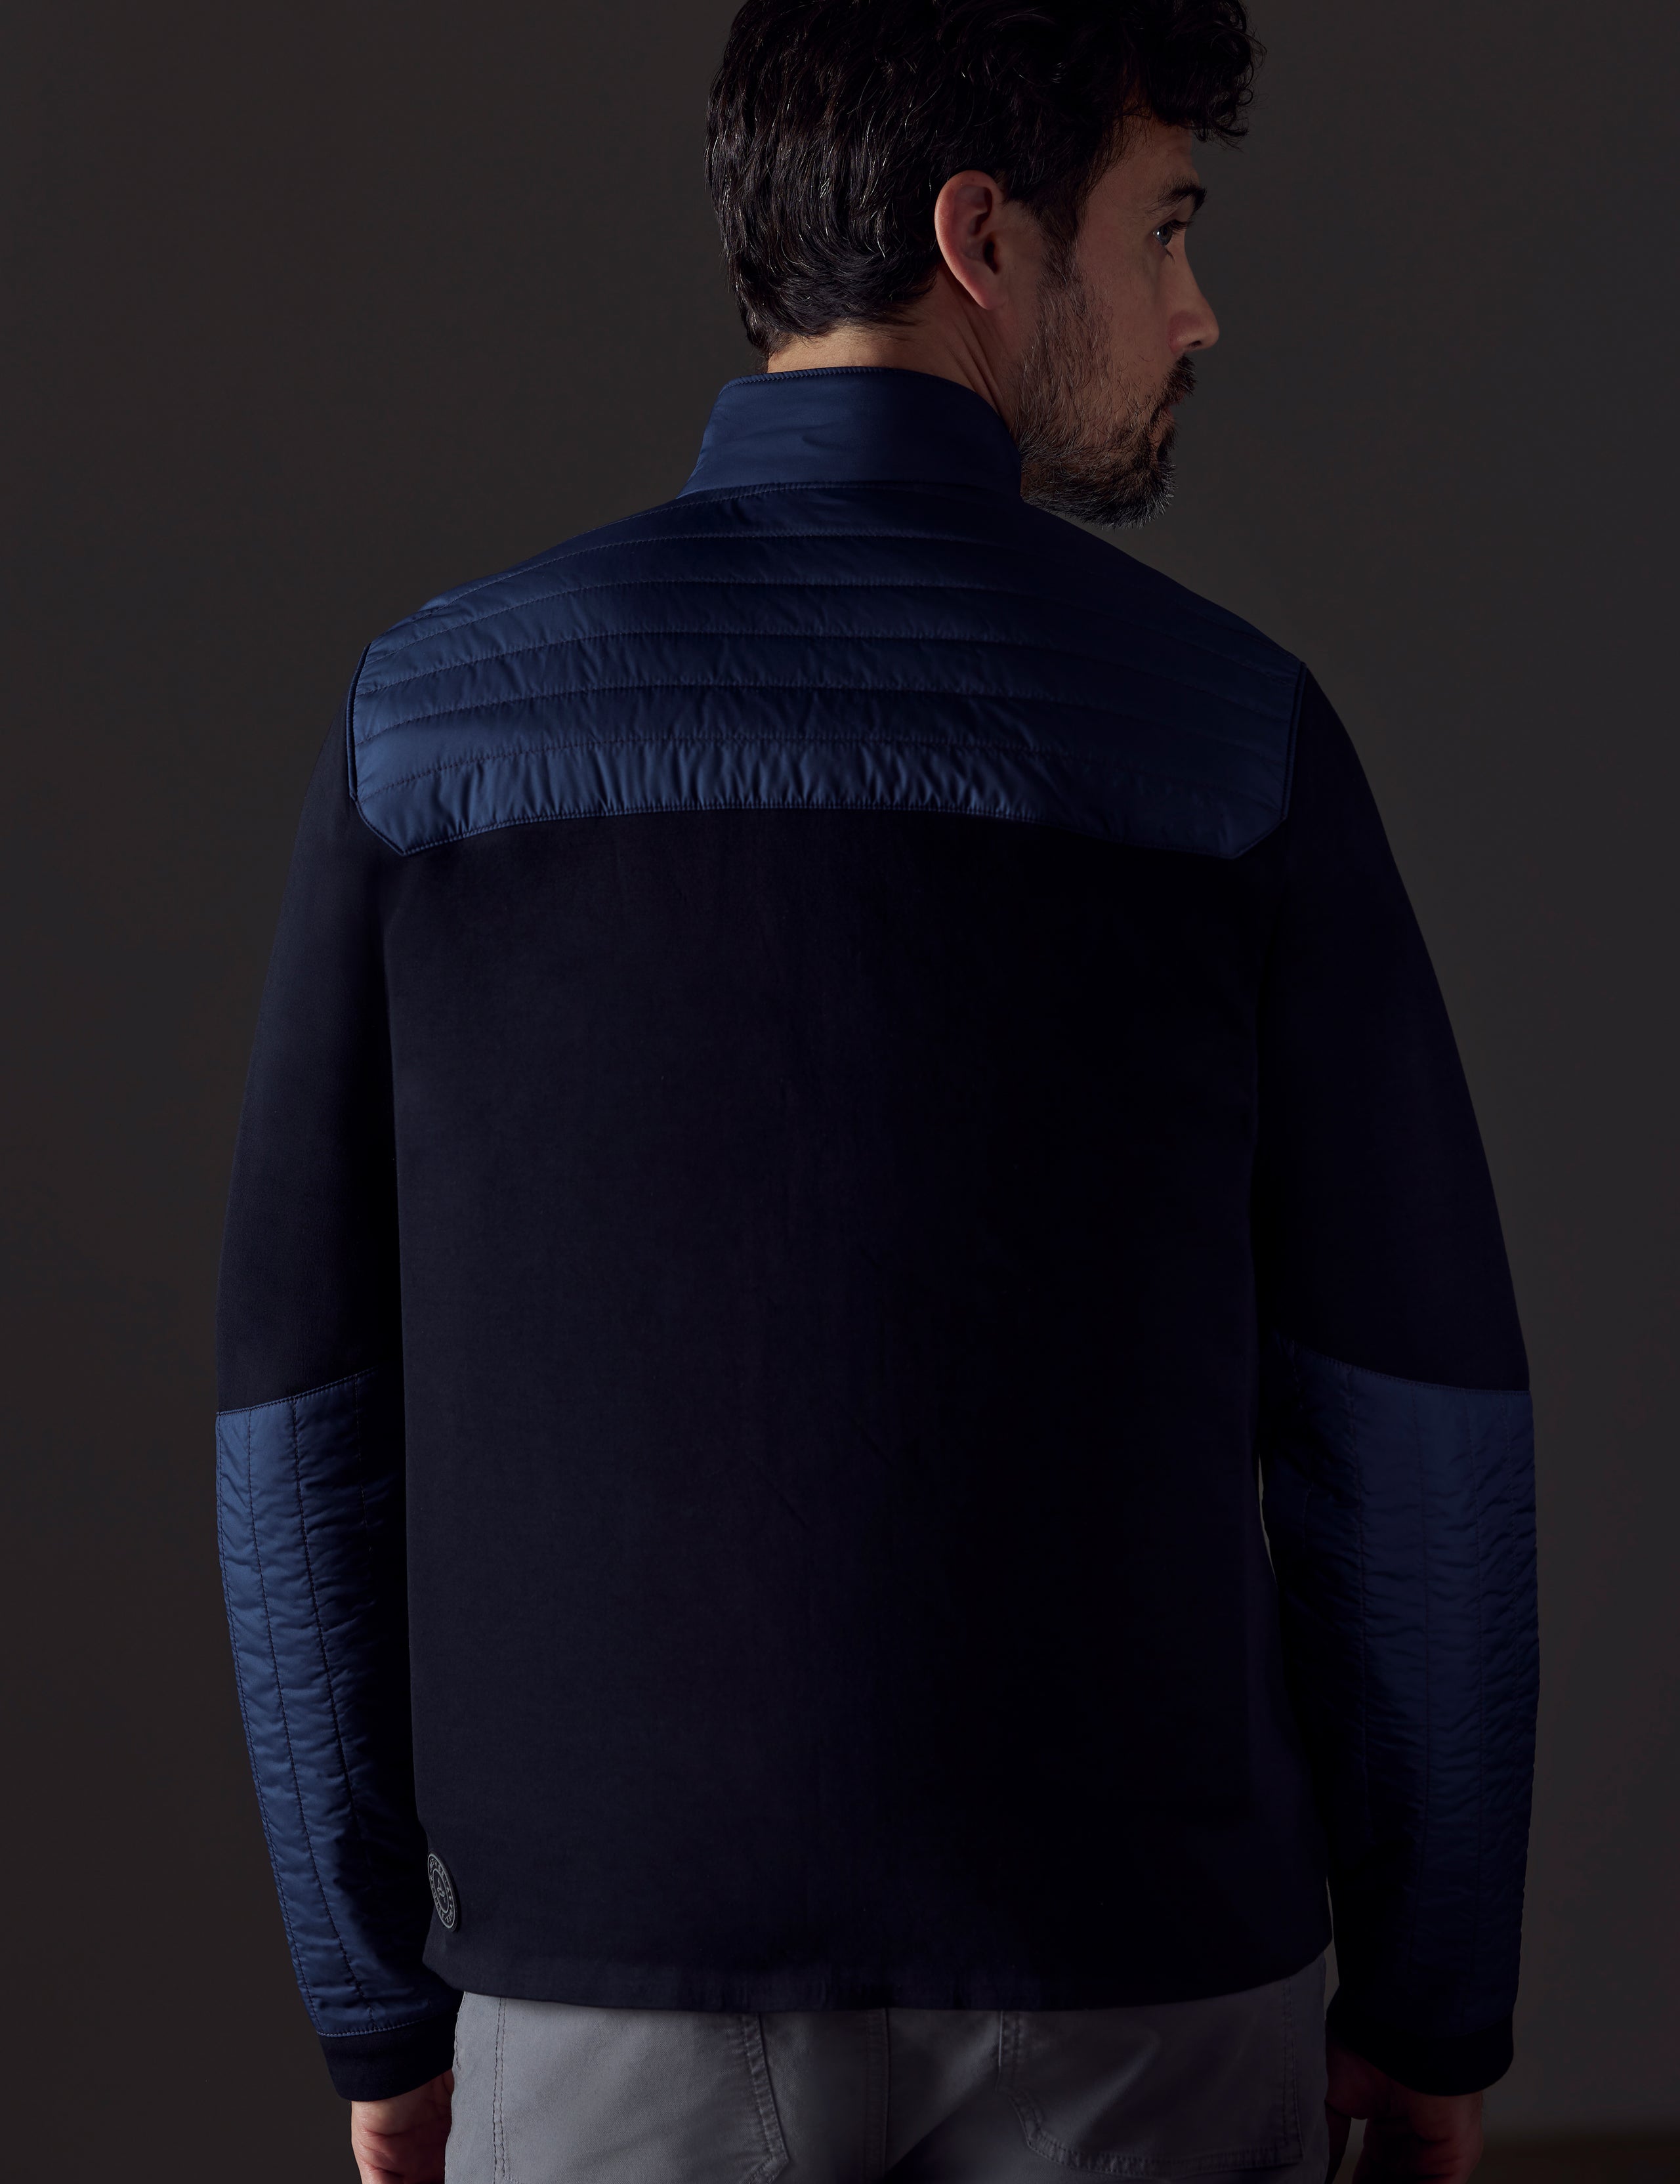 Back view of man wearing blue technical jacket from AETHER Apparel